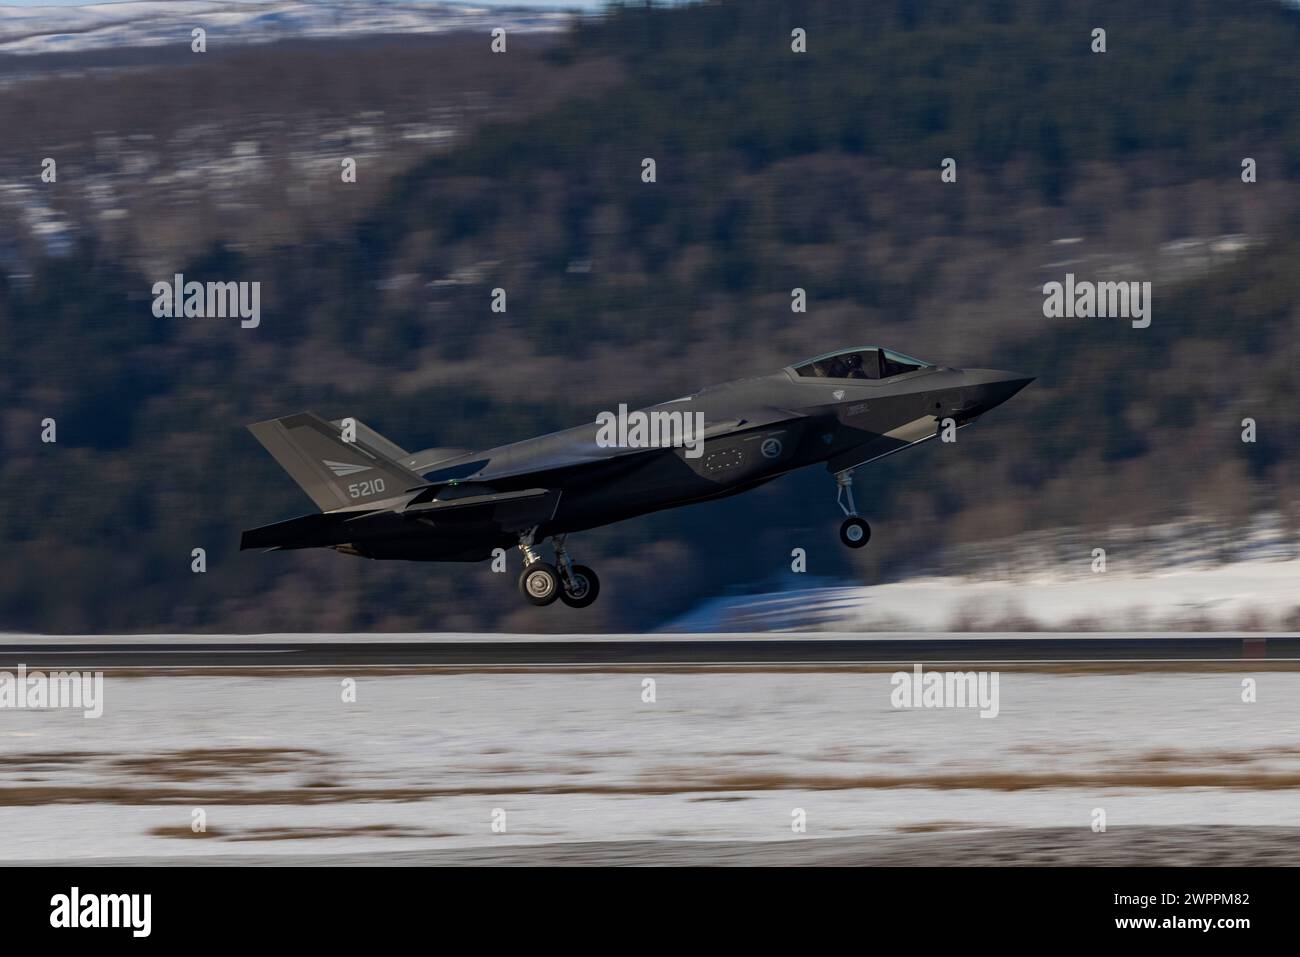 Evenes, Norway. 07 March, 2024. A Royal Norwegian Air Force F-35A Lightning II stealth fighter aircraft, with 332 Squadron, 132 Air Wing, takes off during Exercise Nordic Response 24, March 7, 2024 in Evenes, Norway. Credit: LCpl. Orlanys Diaz Figueroa/U.S. Marines/Alamy Live News Stock Photo